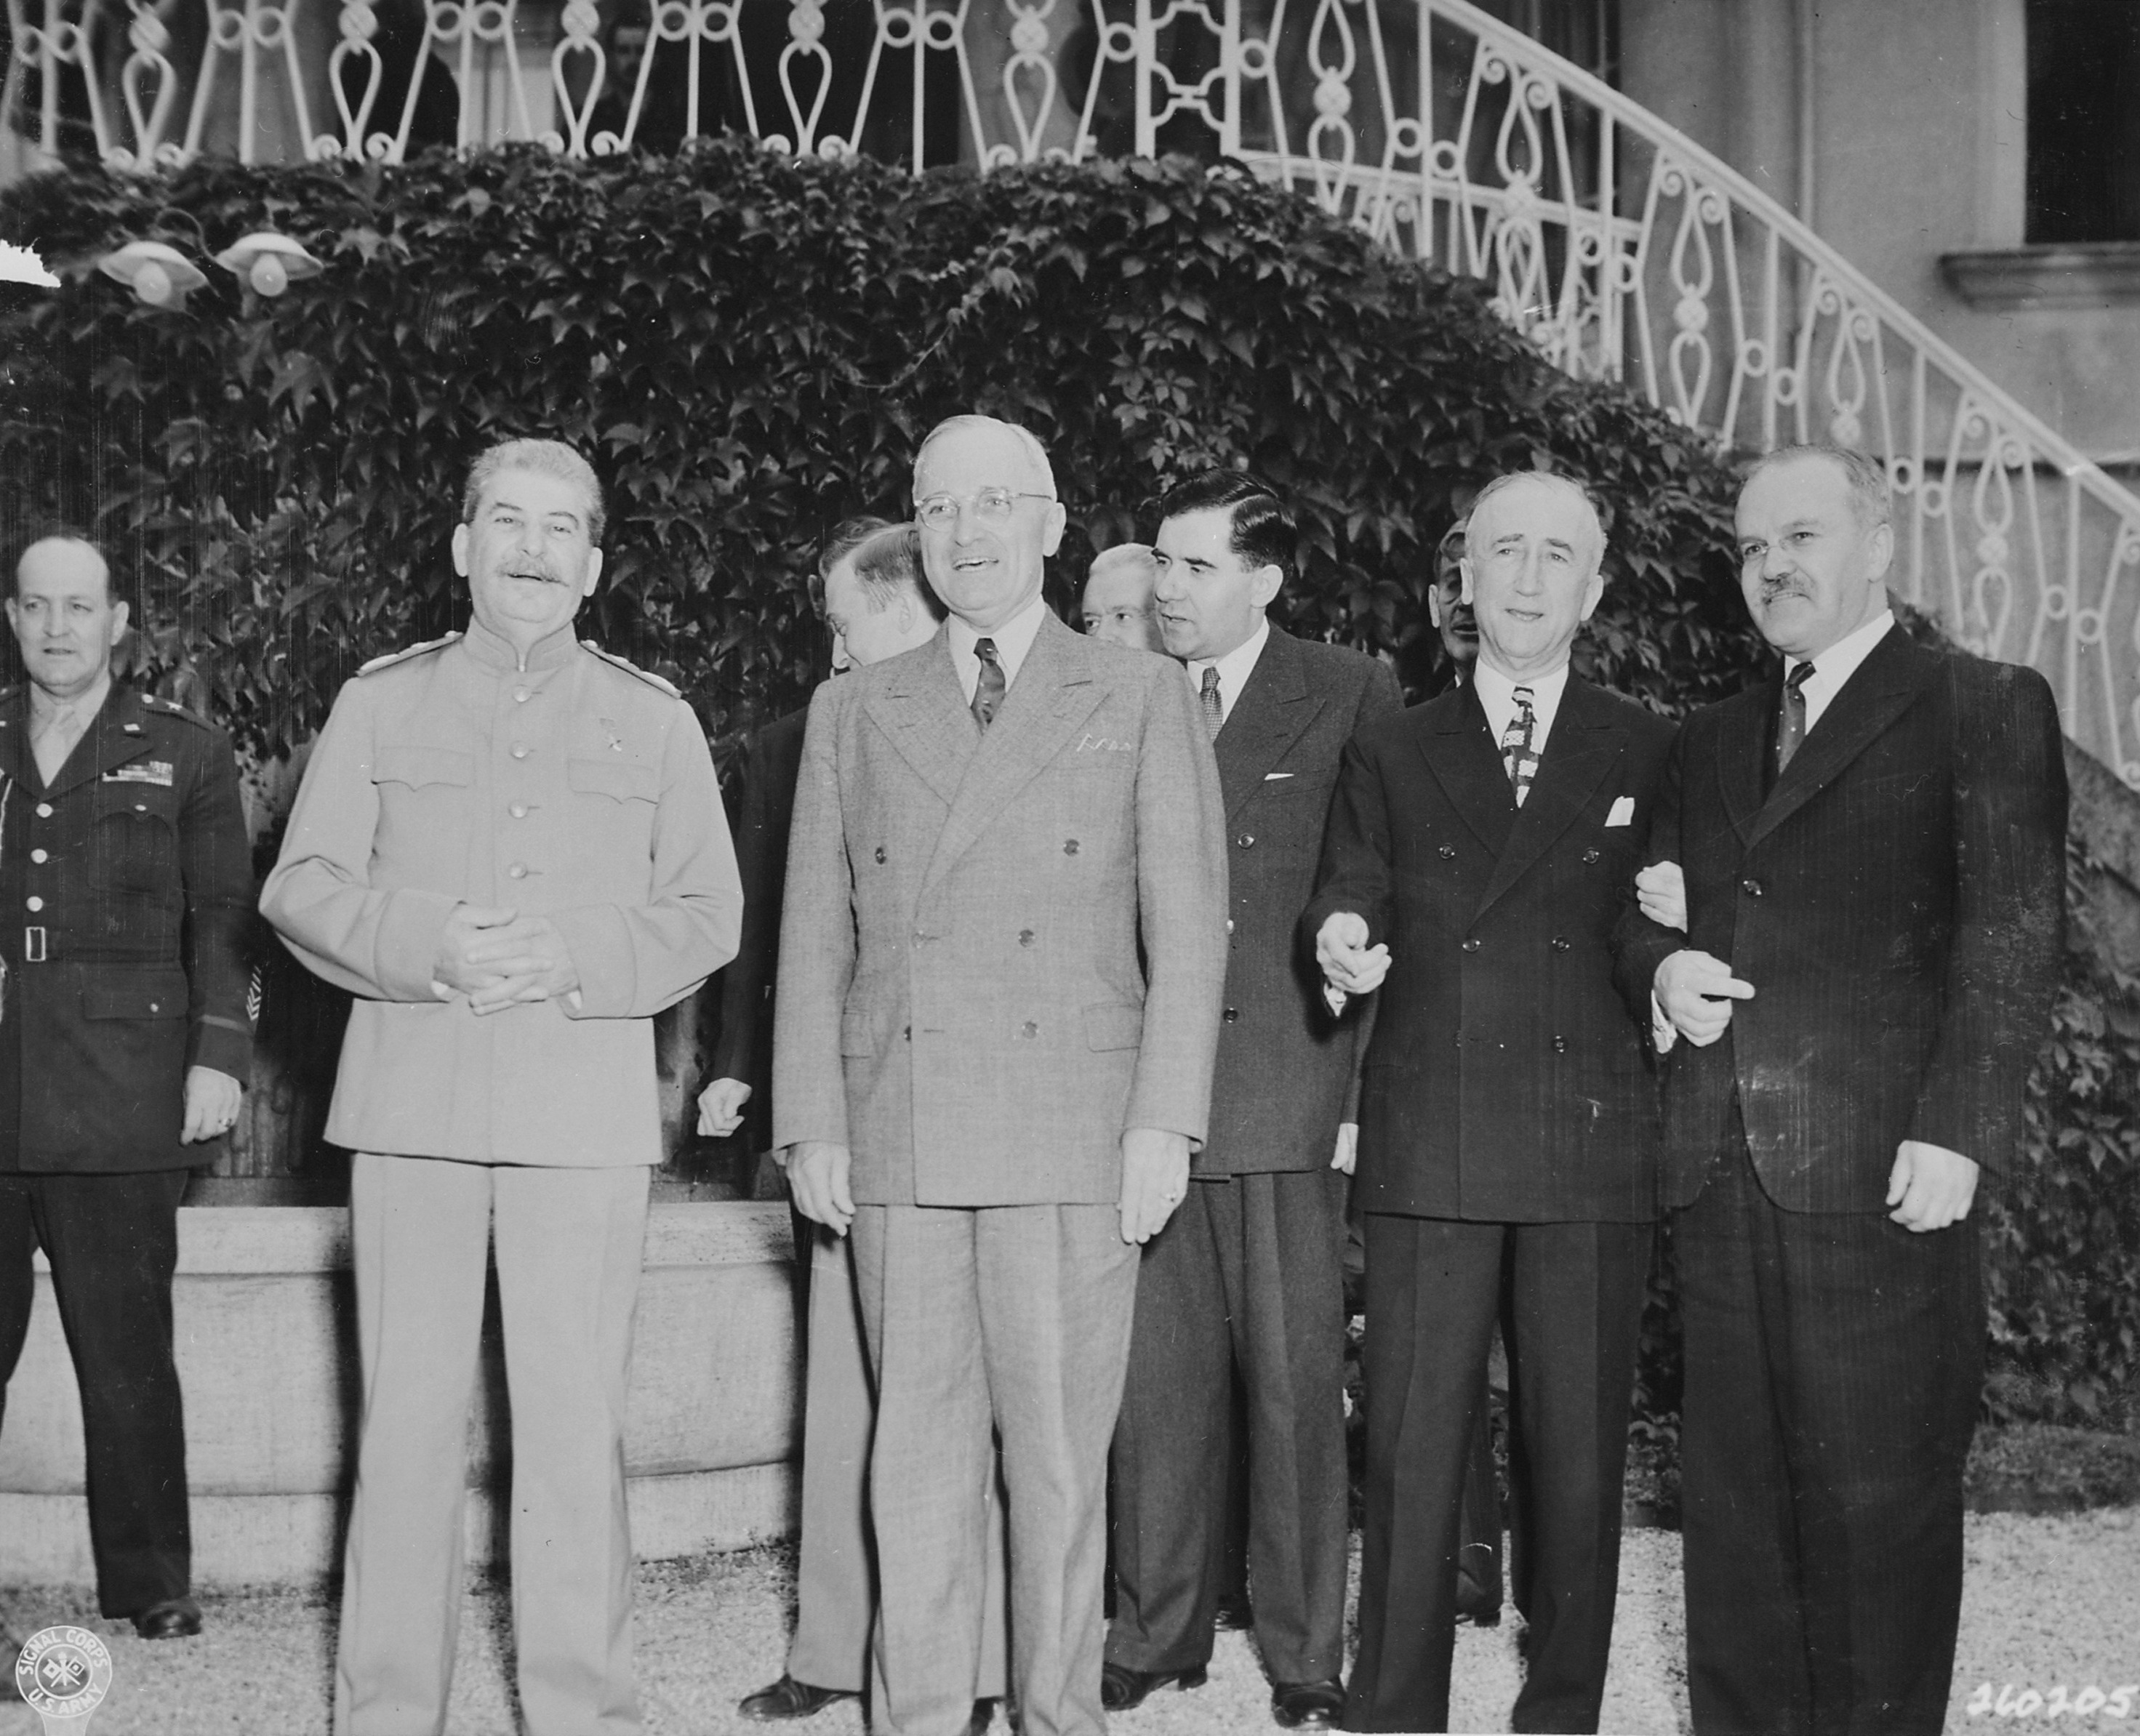 Harry Vaughan, Joseph Stalin, Harry Truman, Andrei Gromyko, Charles Ross, James Byrnes, and Vyacheslav Molotov at Stalin's residence during the Potsdam Conference, Germany, 18 Jul 1945, photo 2 of 2